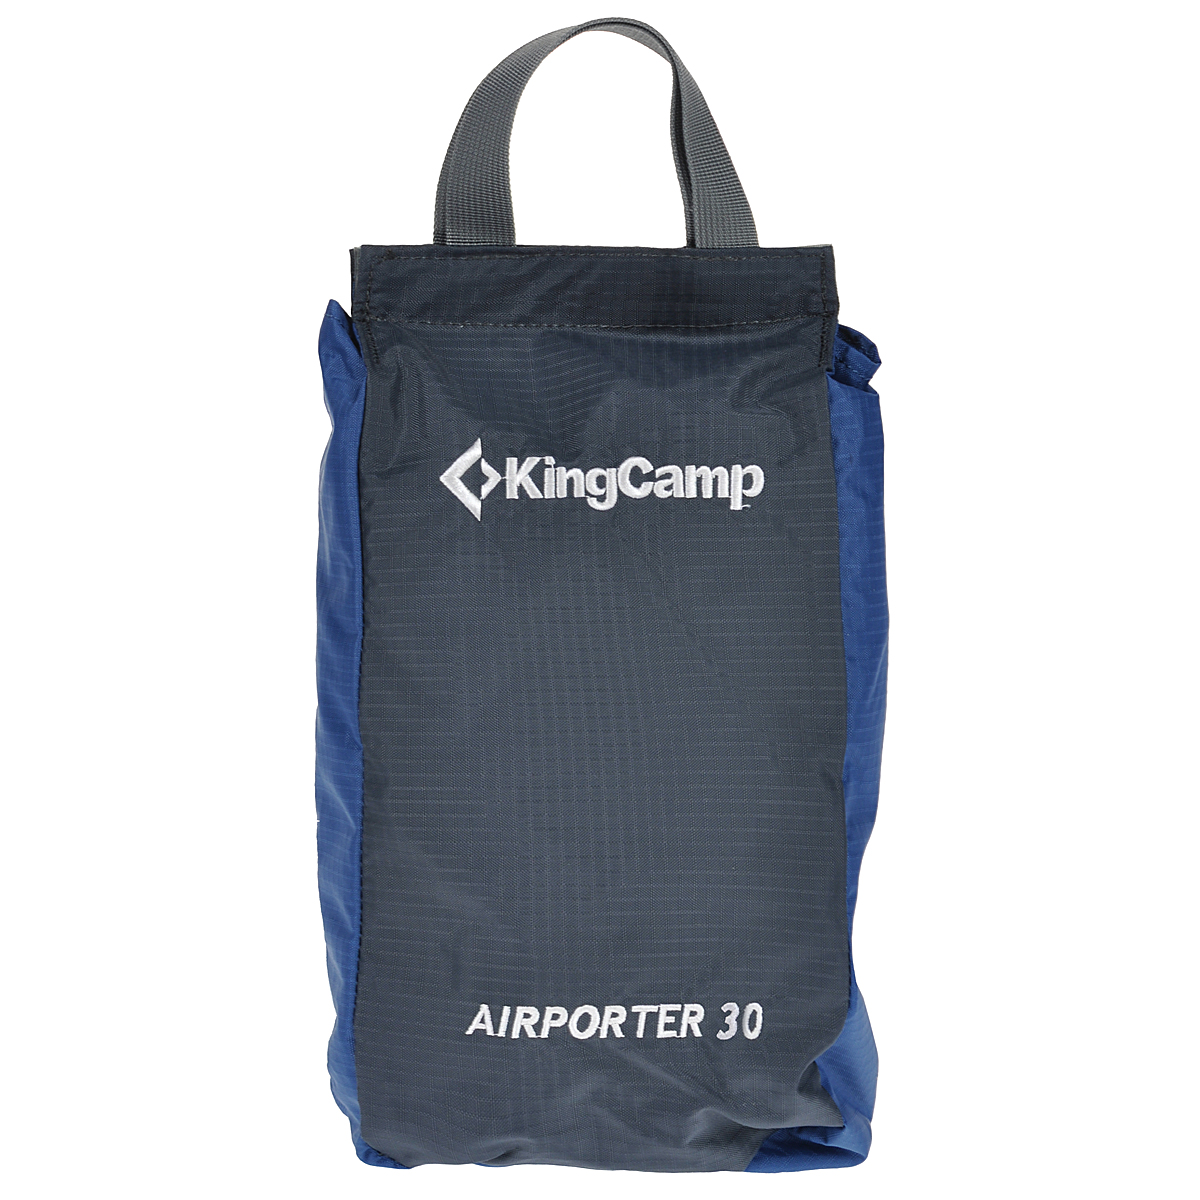 - King Camp "Airporter", 30 